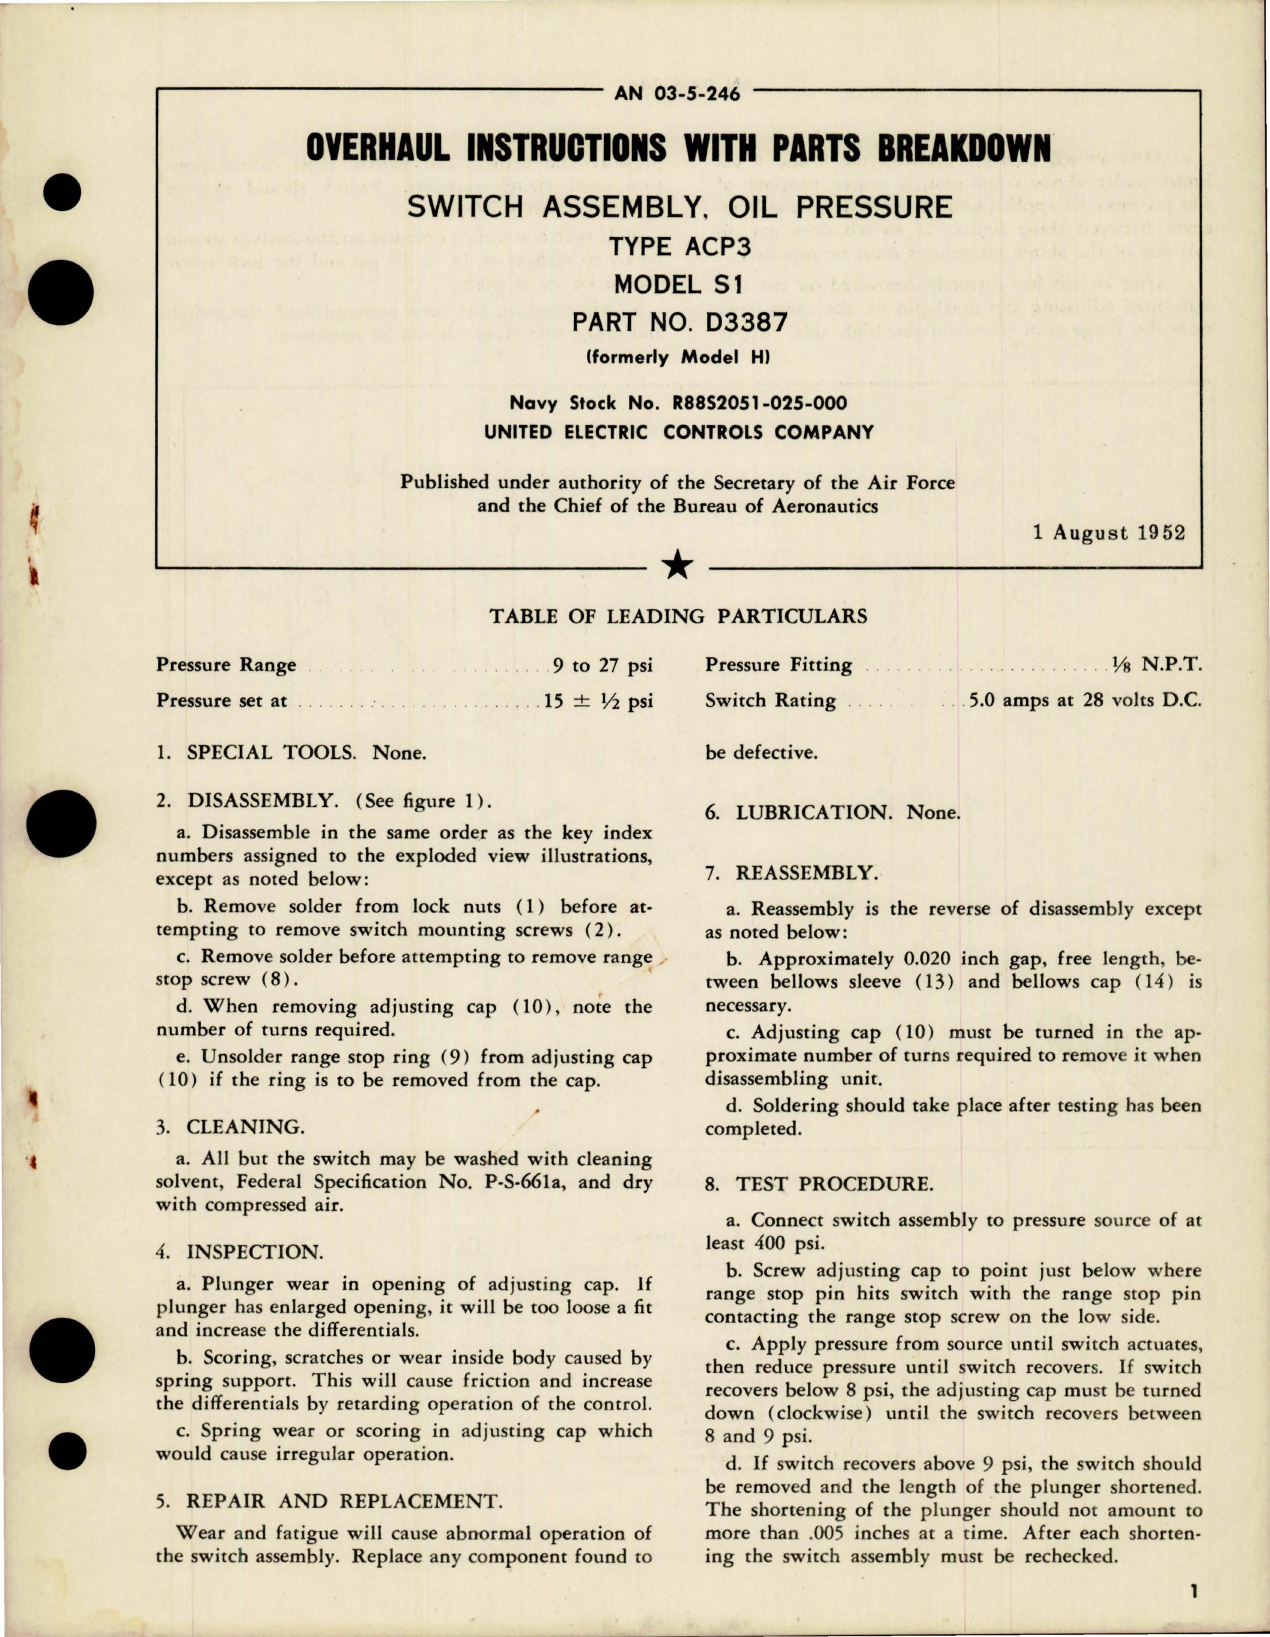 Sample page 1 from AirCorps Library document: Overhaul Instructions with Parts Breakdown for Switch Assembly, Oil Pressure - Type ACP3 - Model S1 - Part D3387 